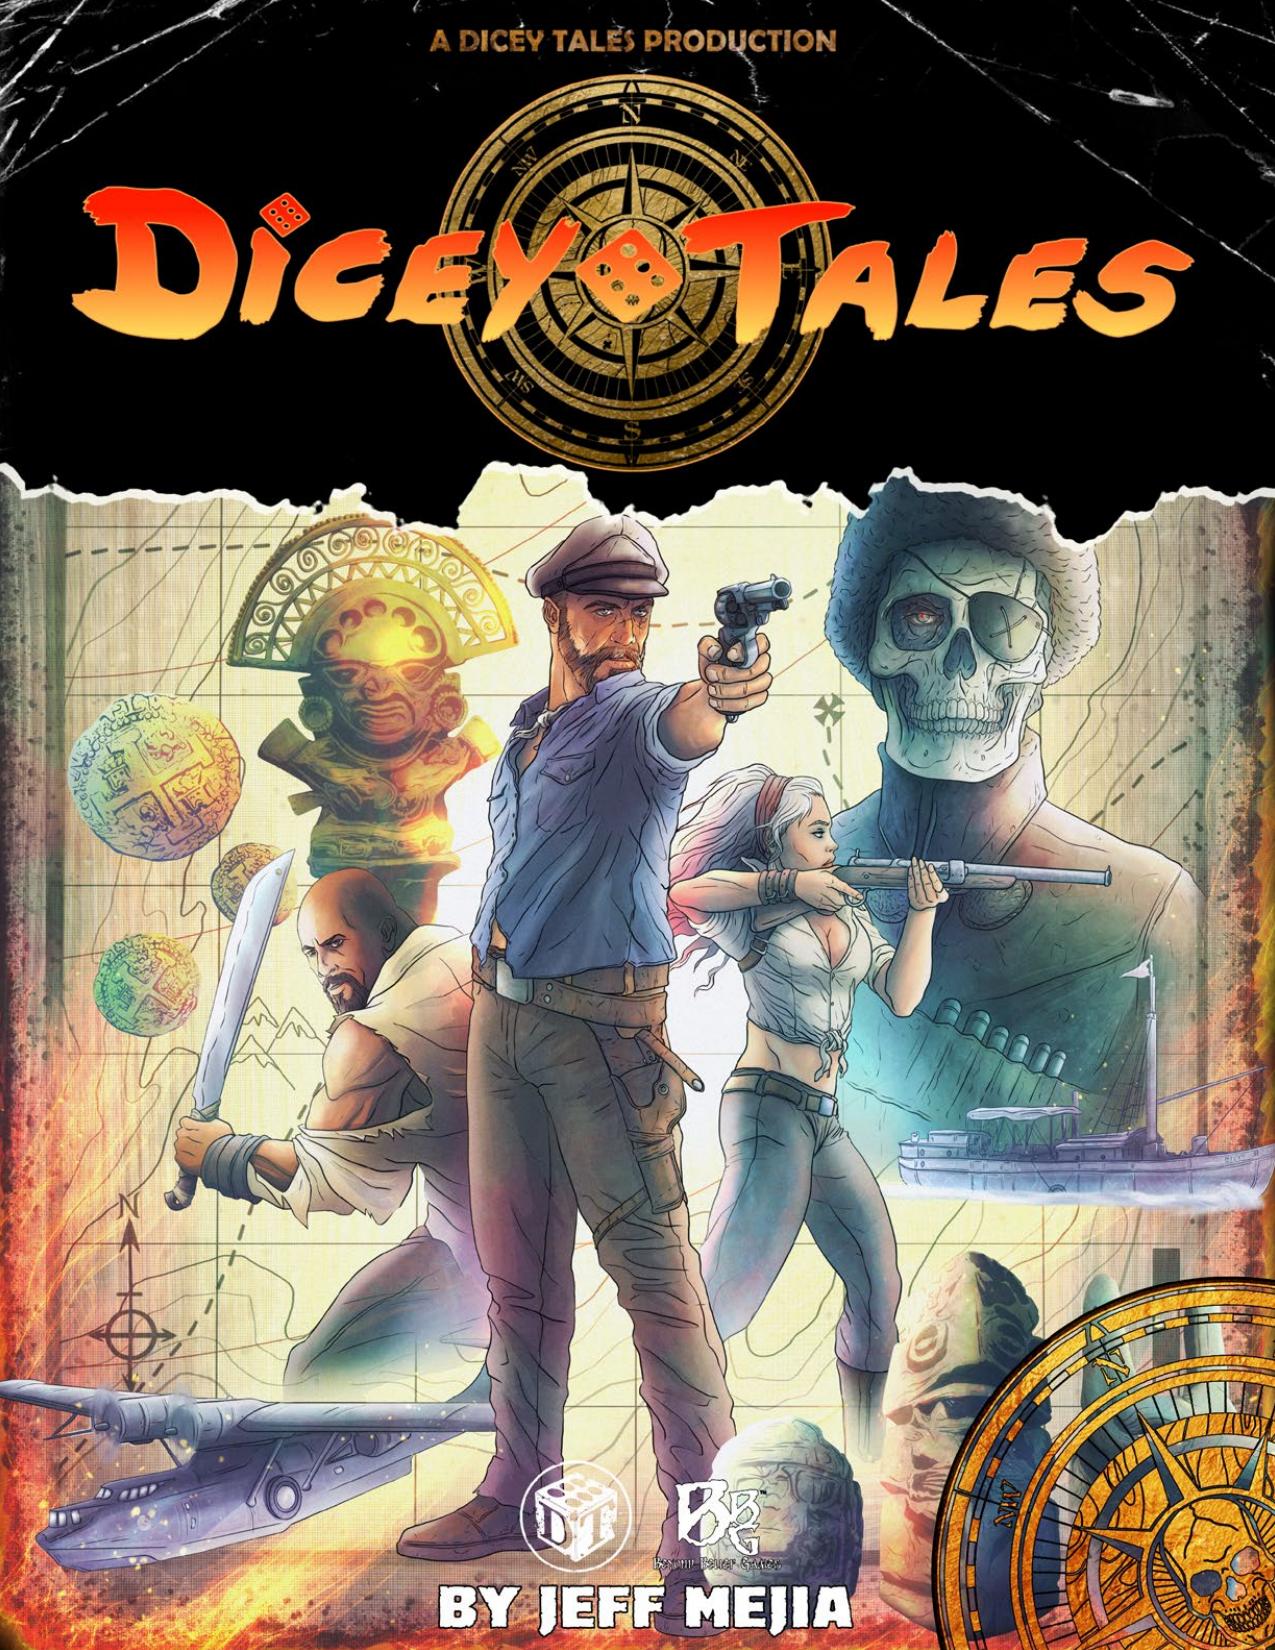 Dicey Tales Pulp Adventure Rules